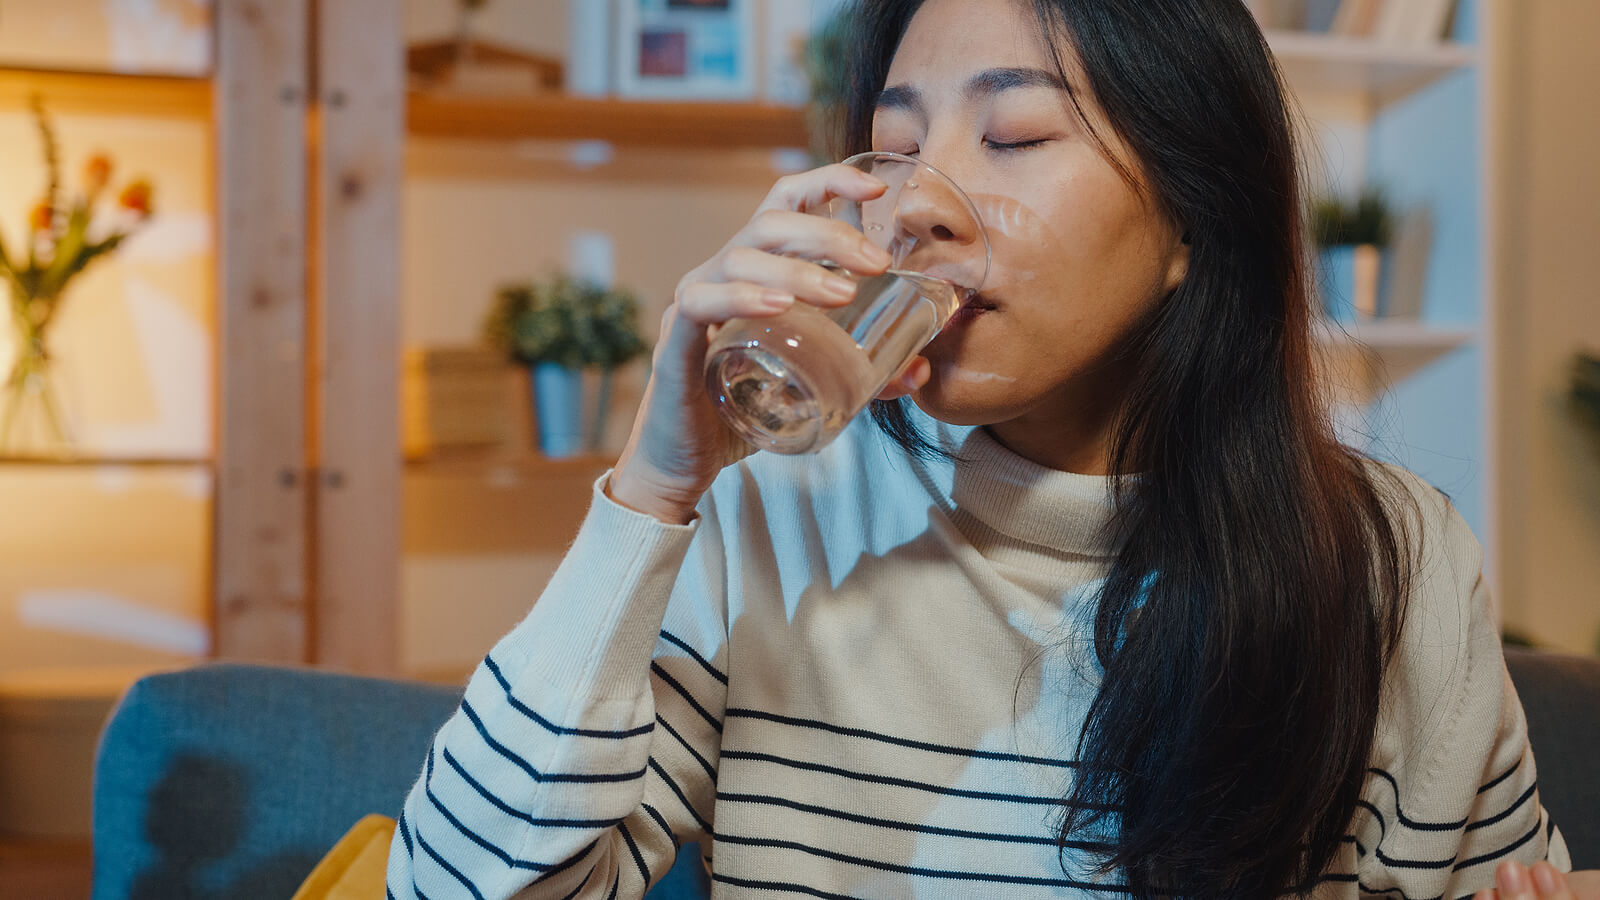 Diabetes and dry mouth are usually temporarily solved by drinking water